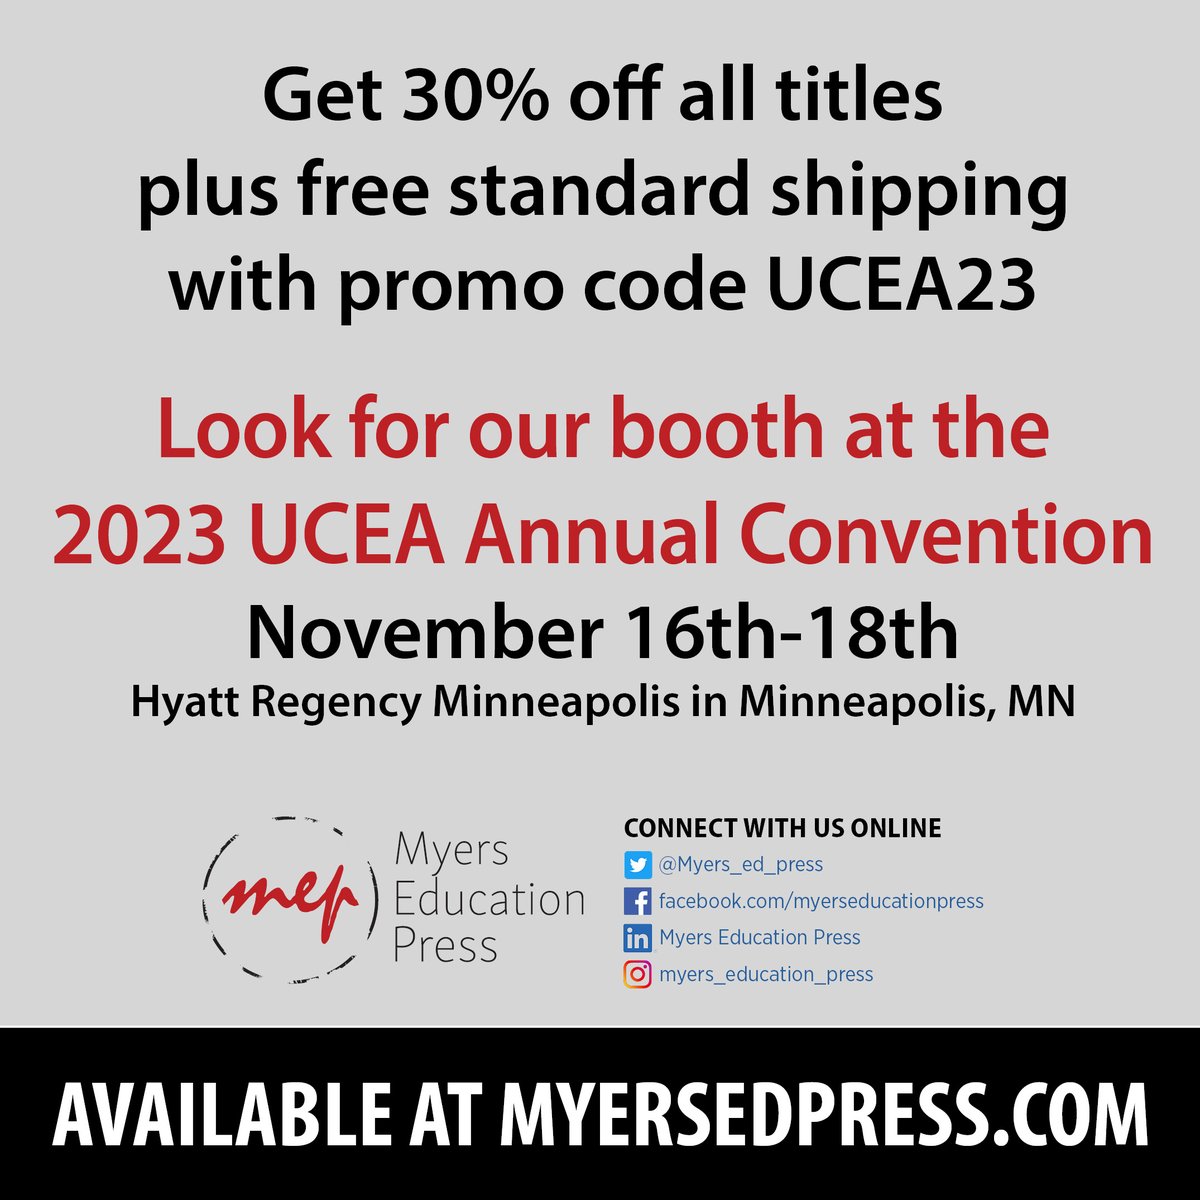 We're also exhibiting at the 2023 UCEA Annual Convention from Nov. 16-18 at the Hyatt Regency Minneapolis in Minneapolis, MN. Stop by to say hello! Virtual booth option: myersedpress.presswarehouse.com/landing/UCEA20… #UCEA23 #education